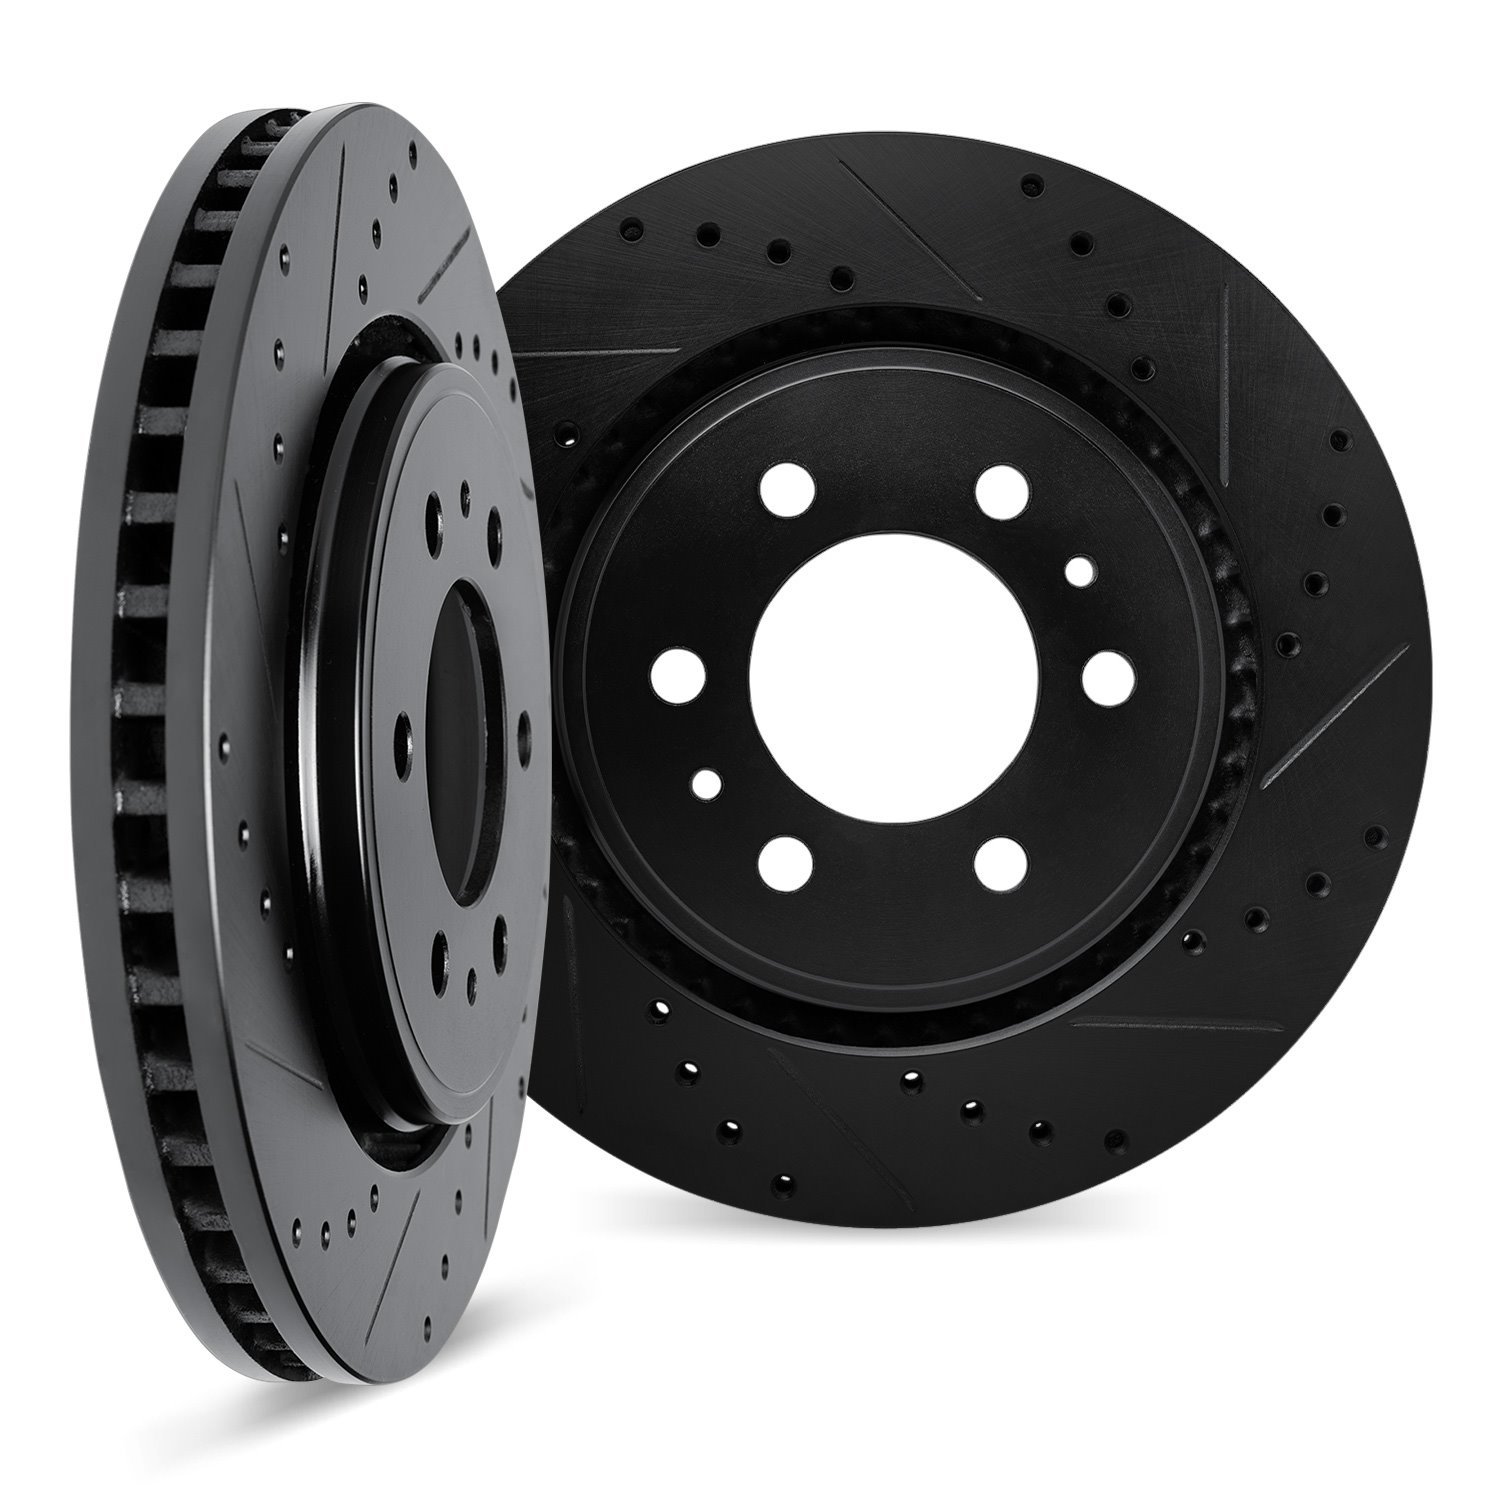 8002-47064 Drilled/Slotted Brake Rotors [Black], Fits Select GM, Position: Rear